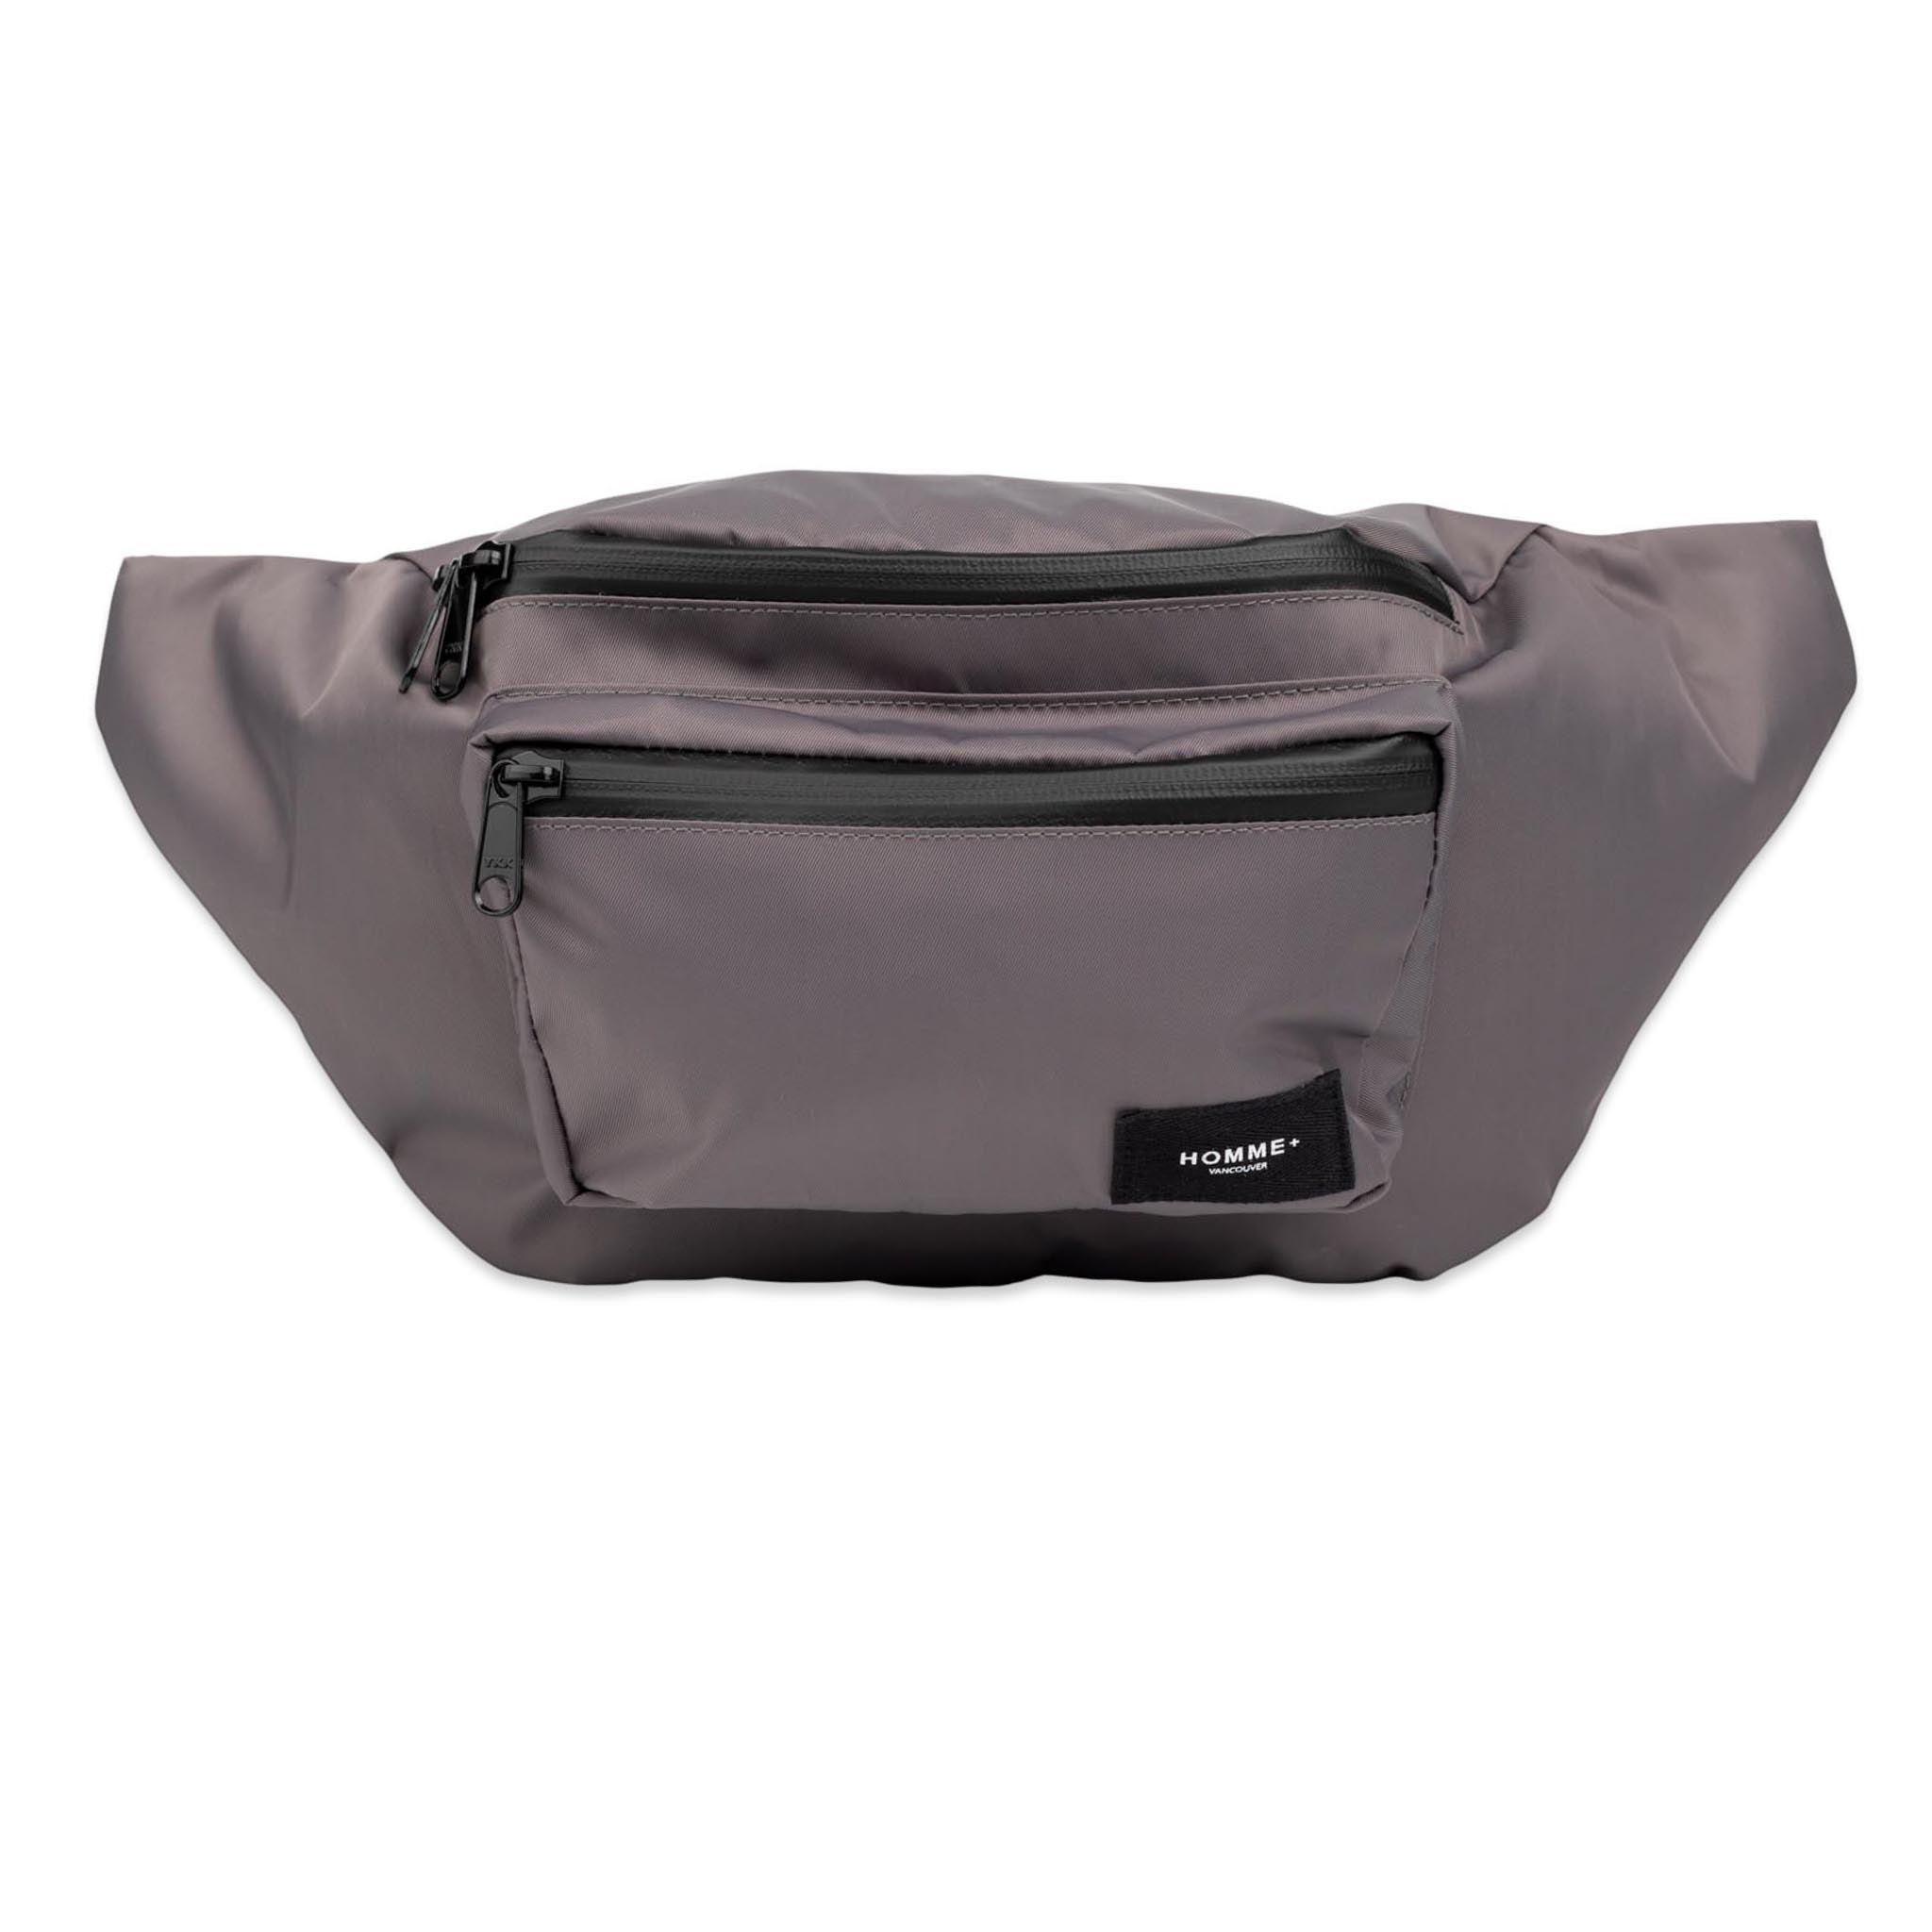 HOMME+ Large Nylon Waist Pack Charcoal